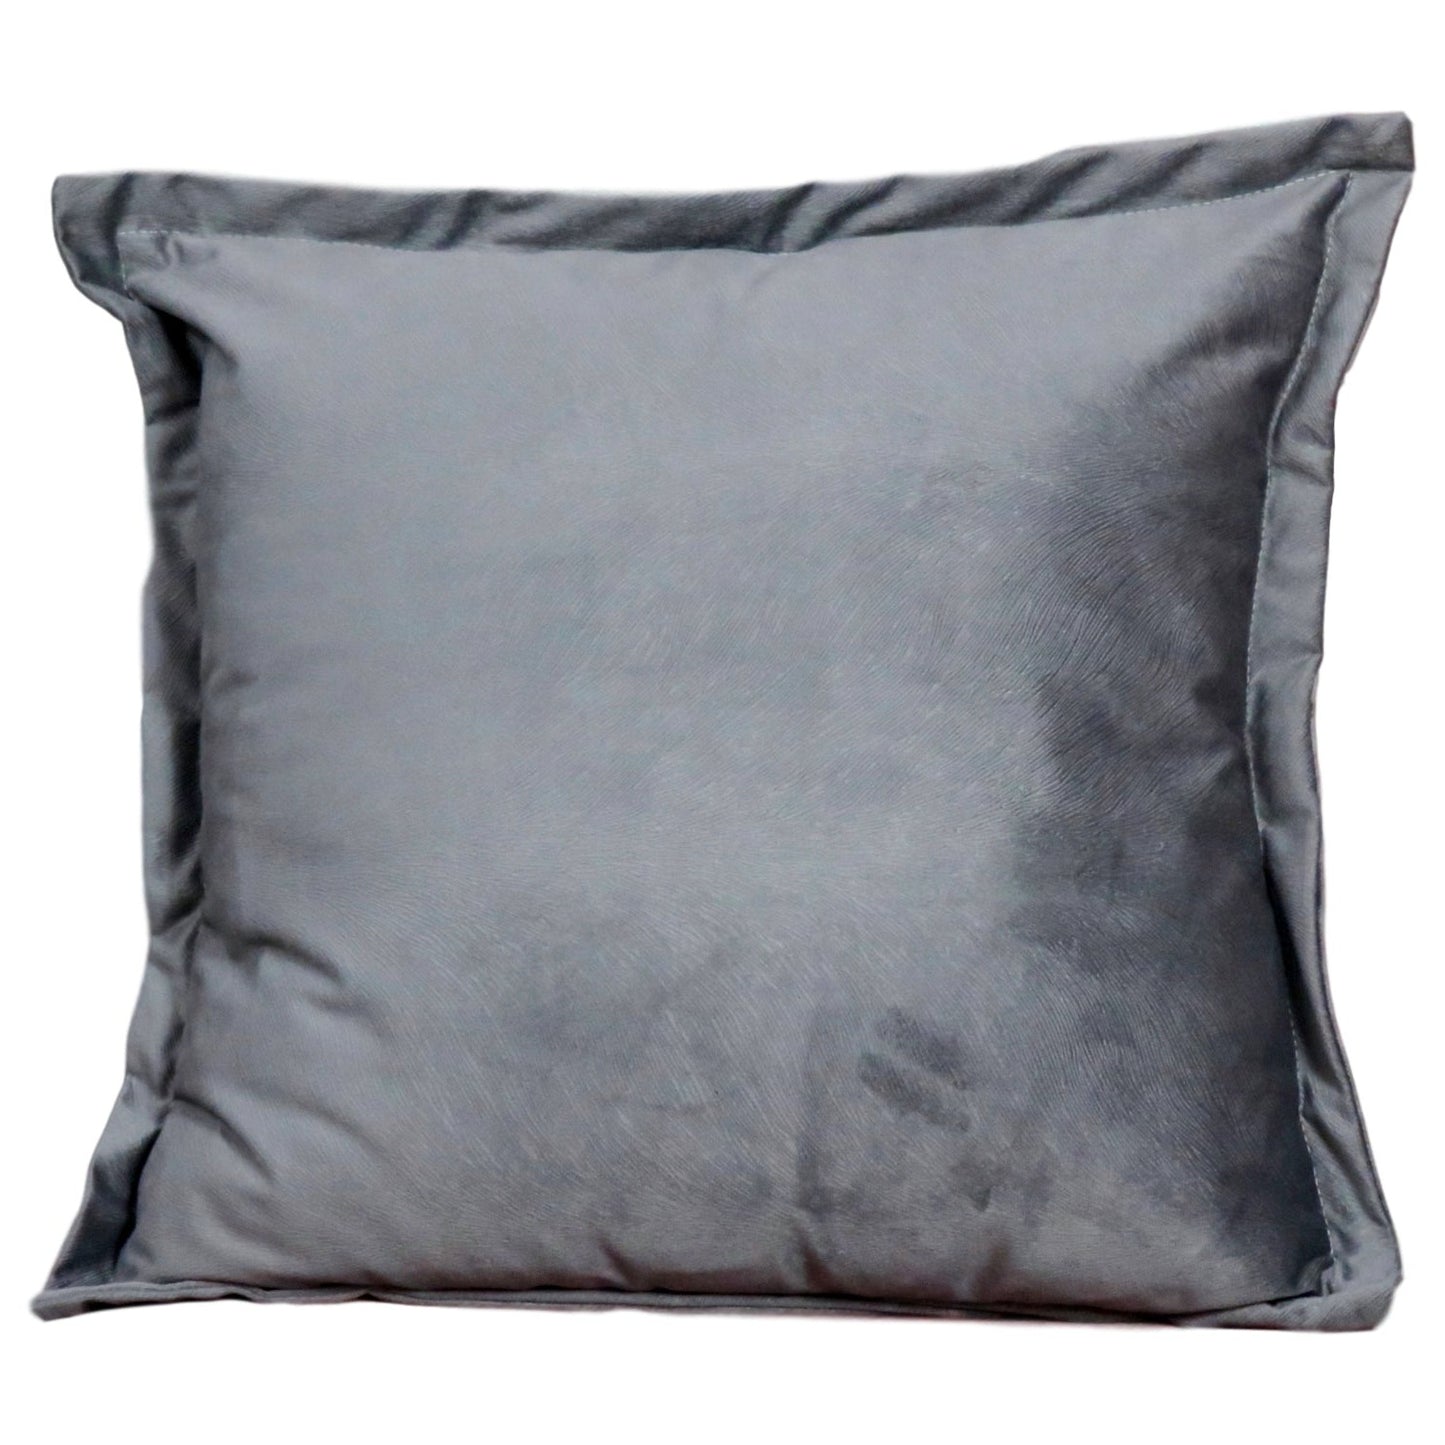 Snakeskin textured grey velvet cushion - feather filled by Native